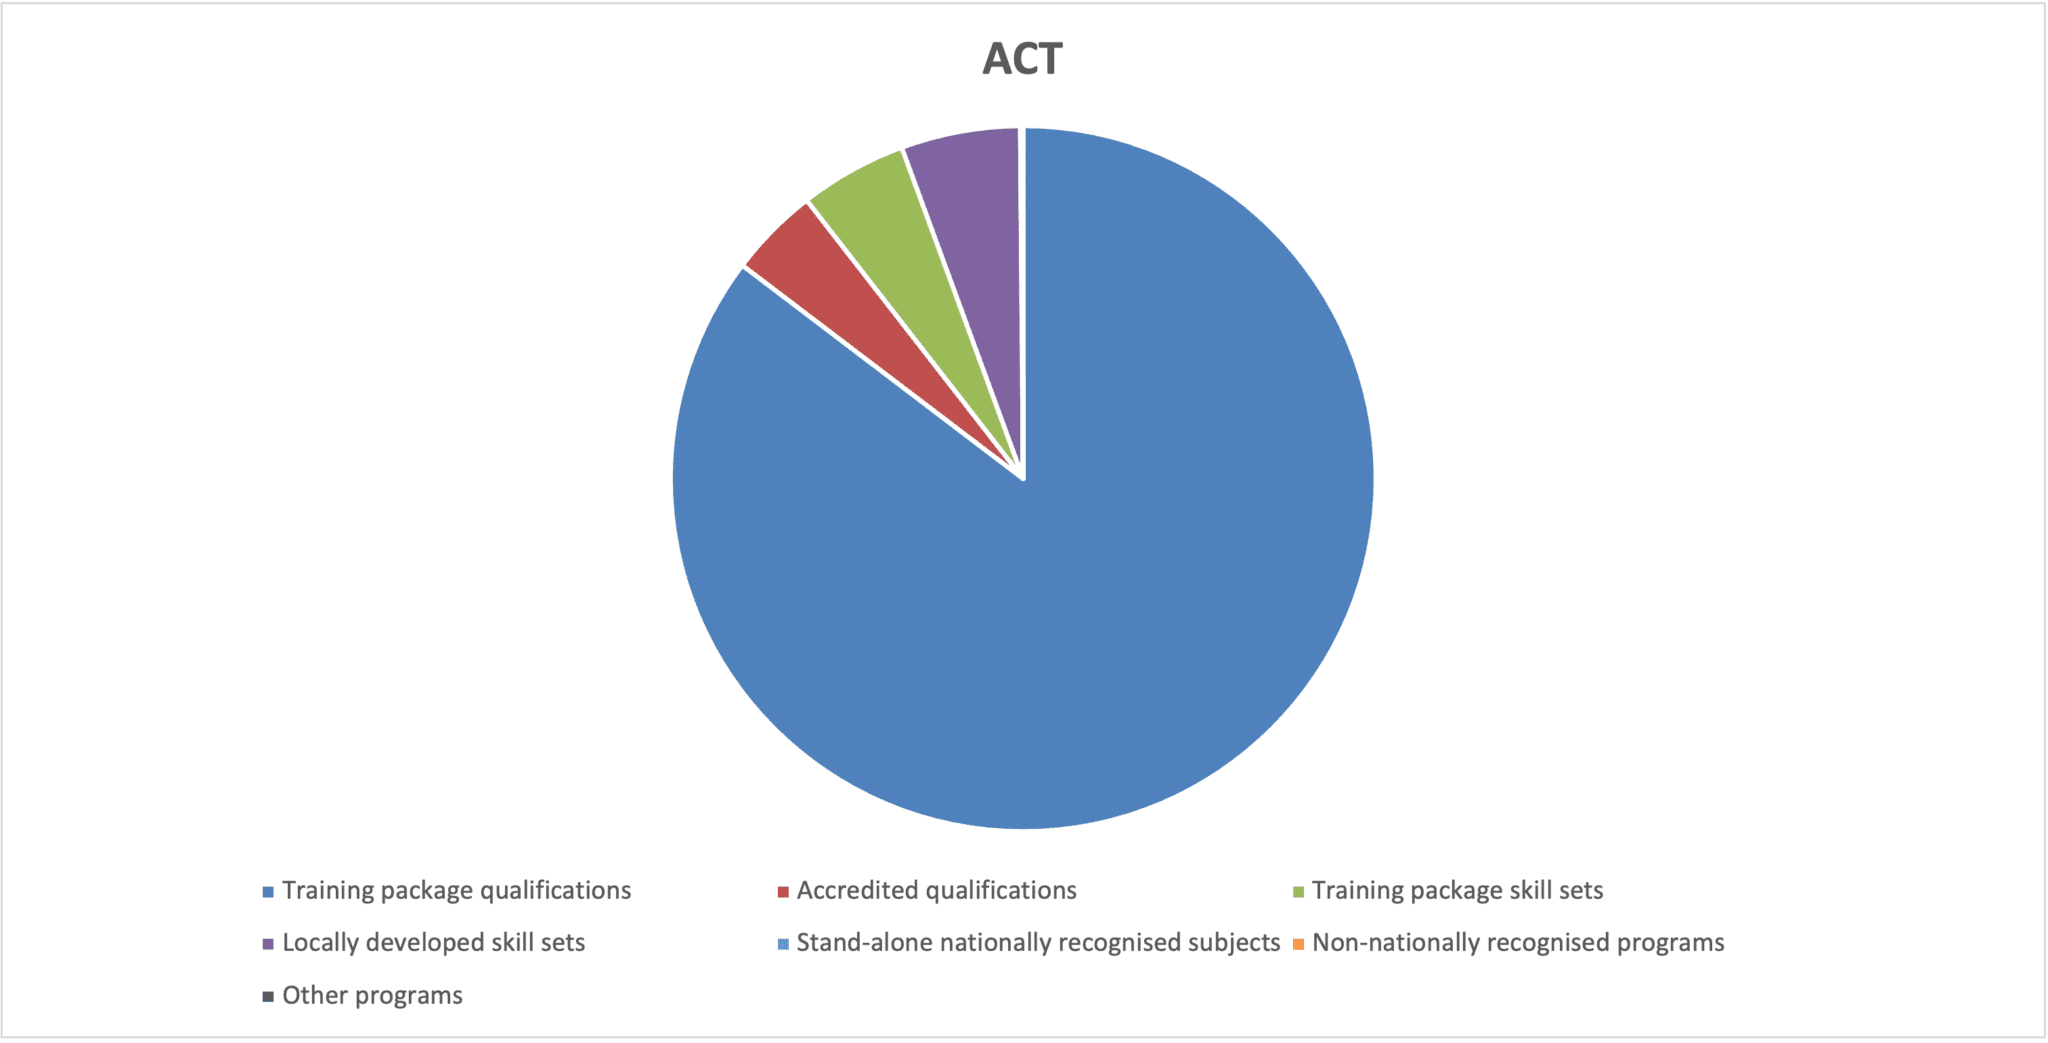 Chart showing ACT course enrolments